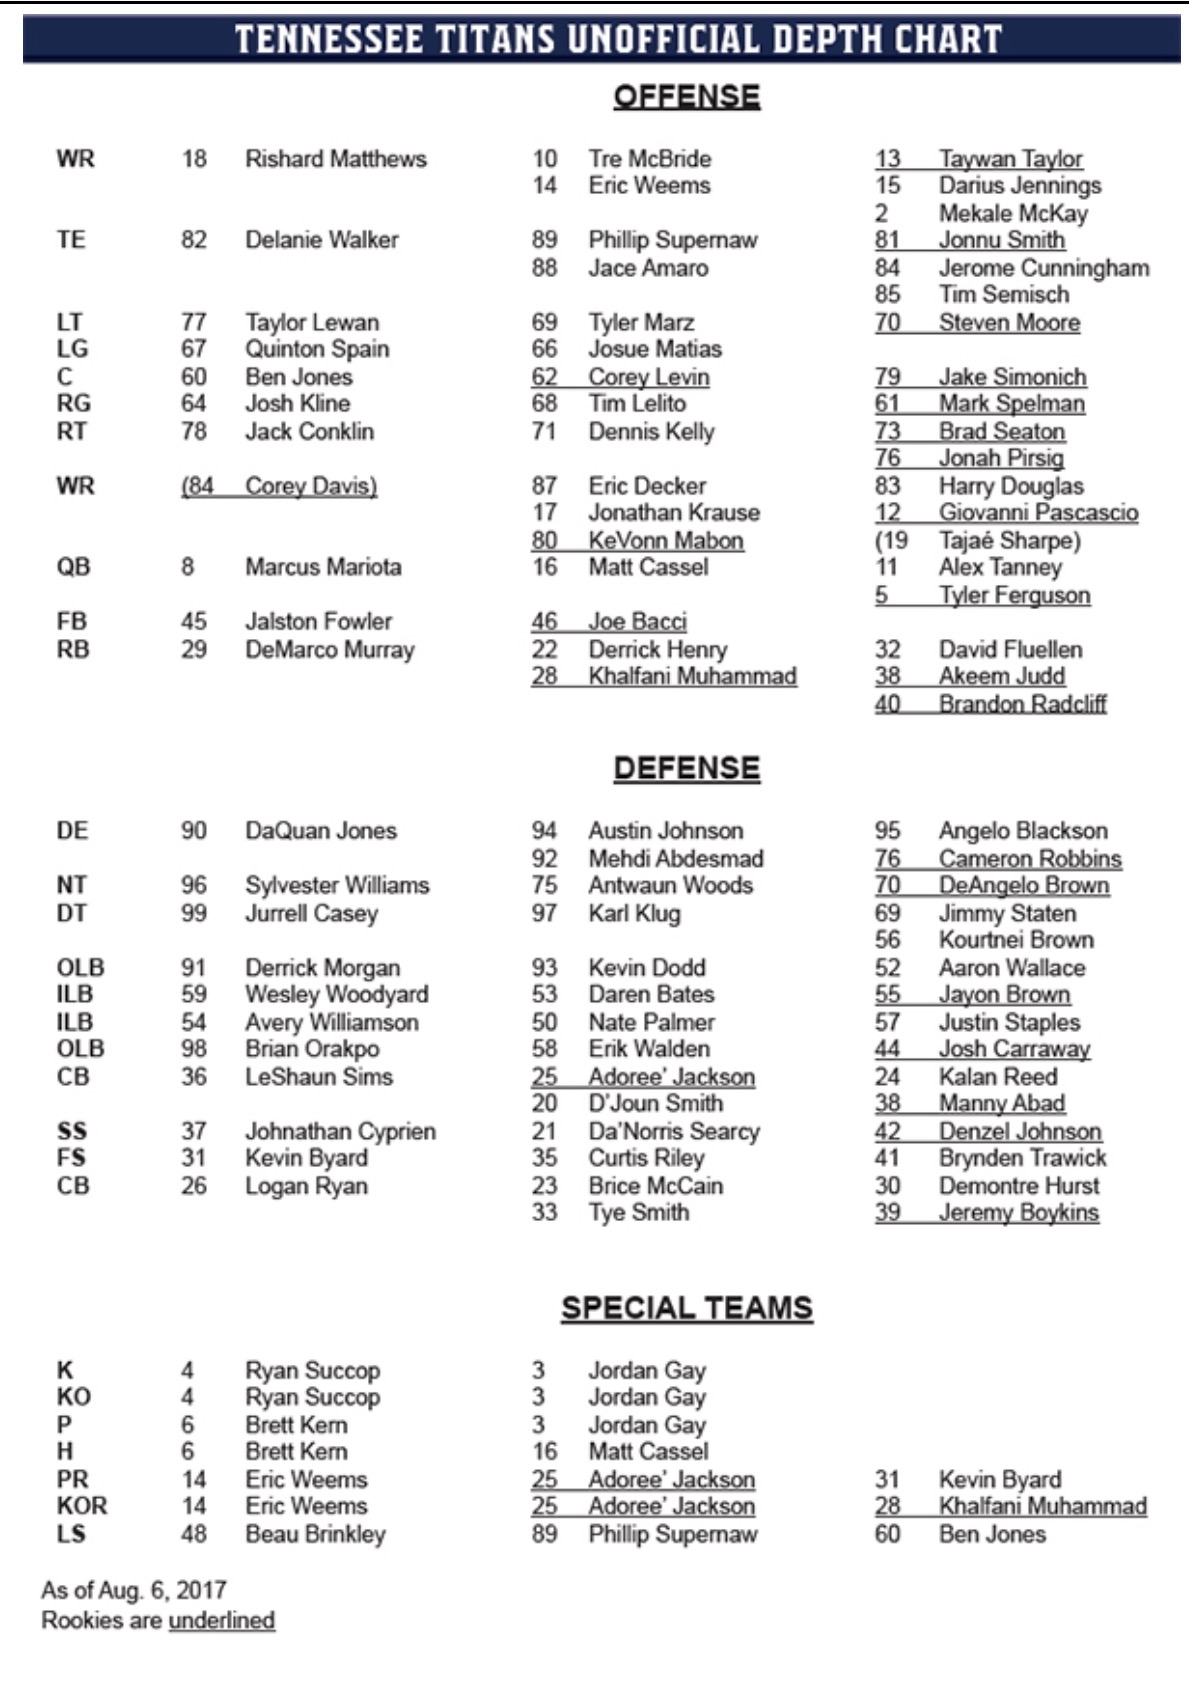 Titans initial, unofficial depth chart